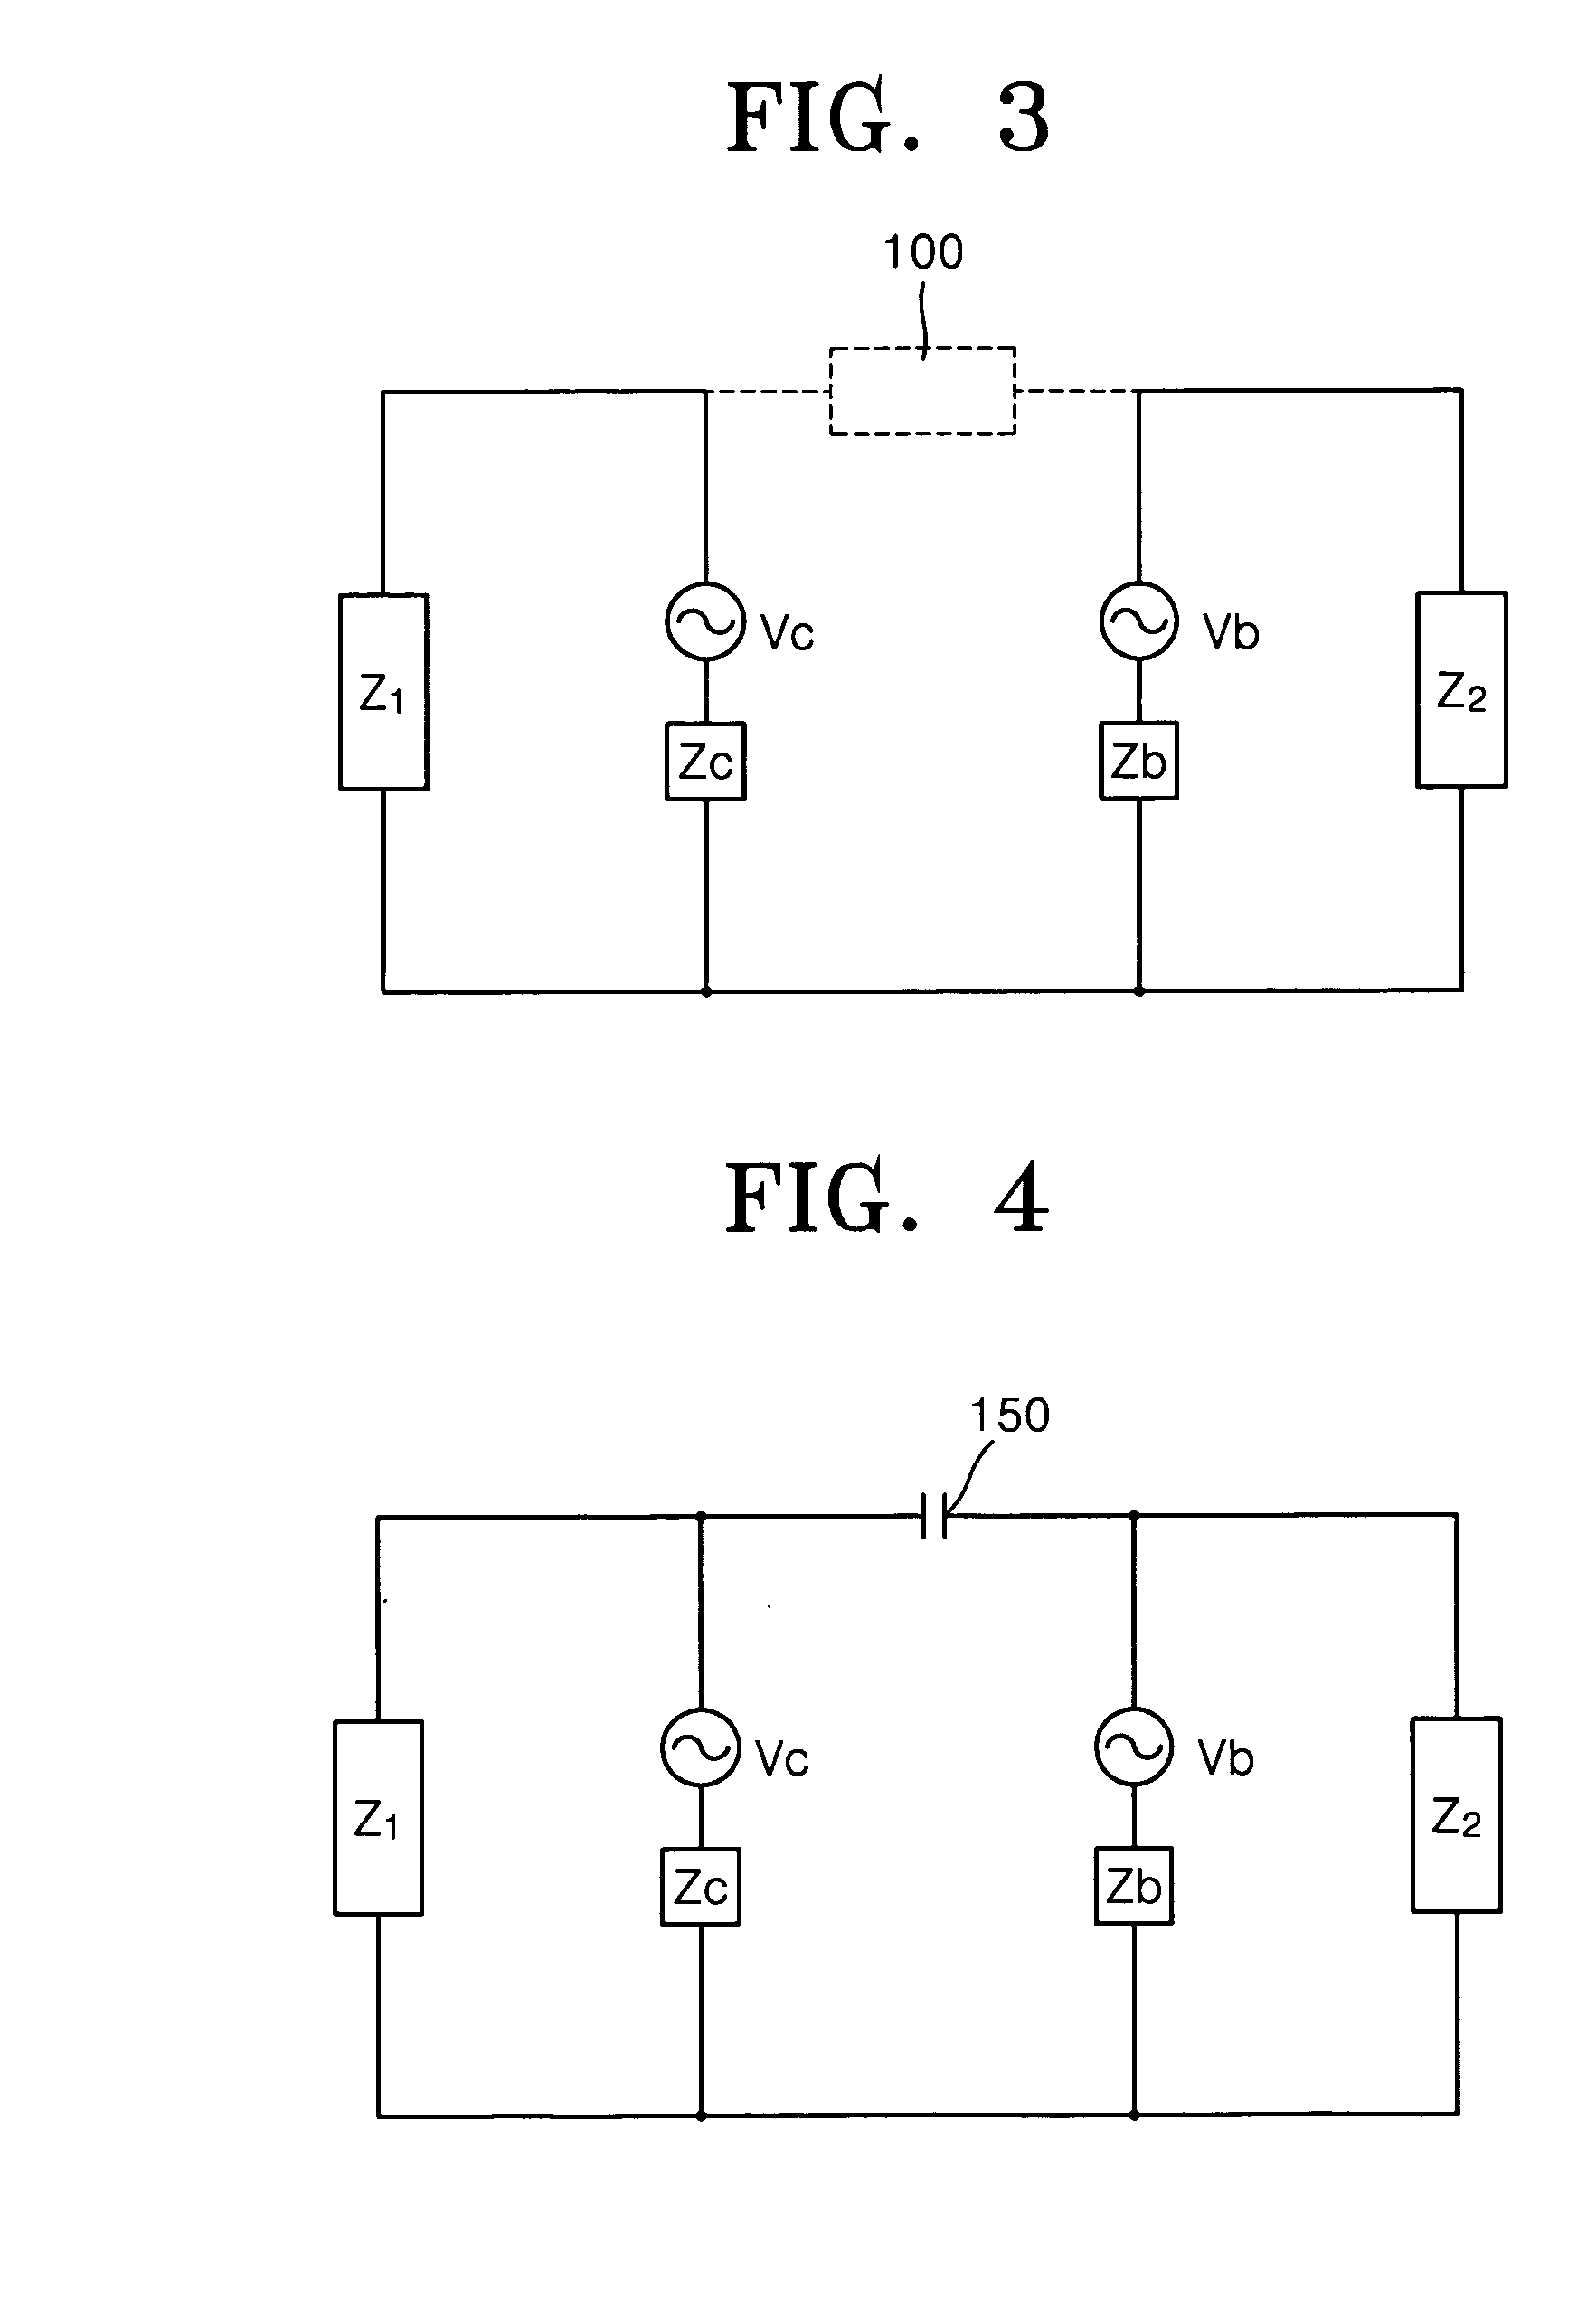 Apparatus for adjusting phase between the different phases in power line communication system